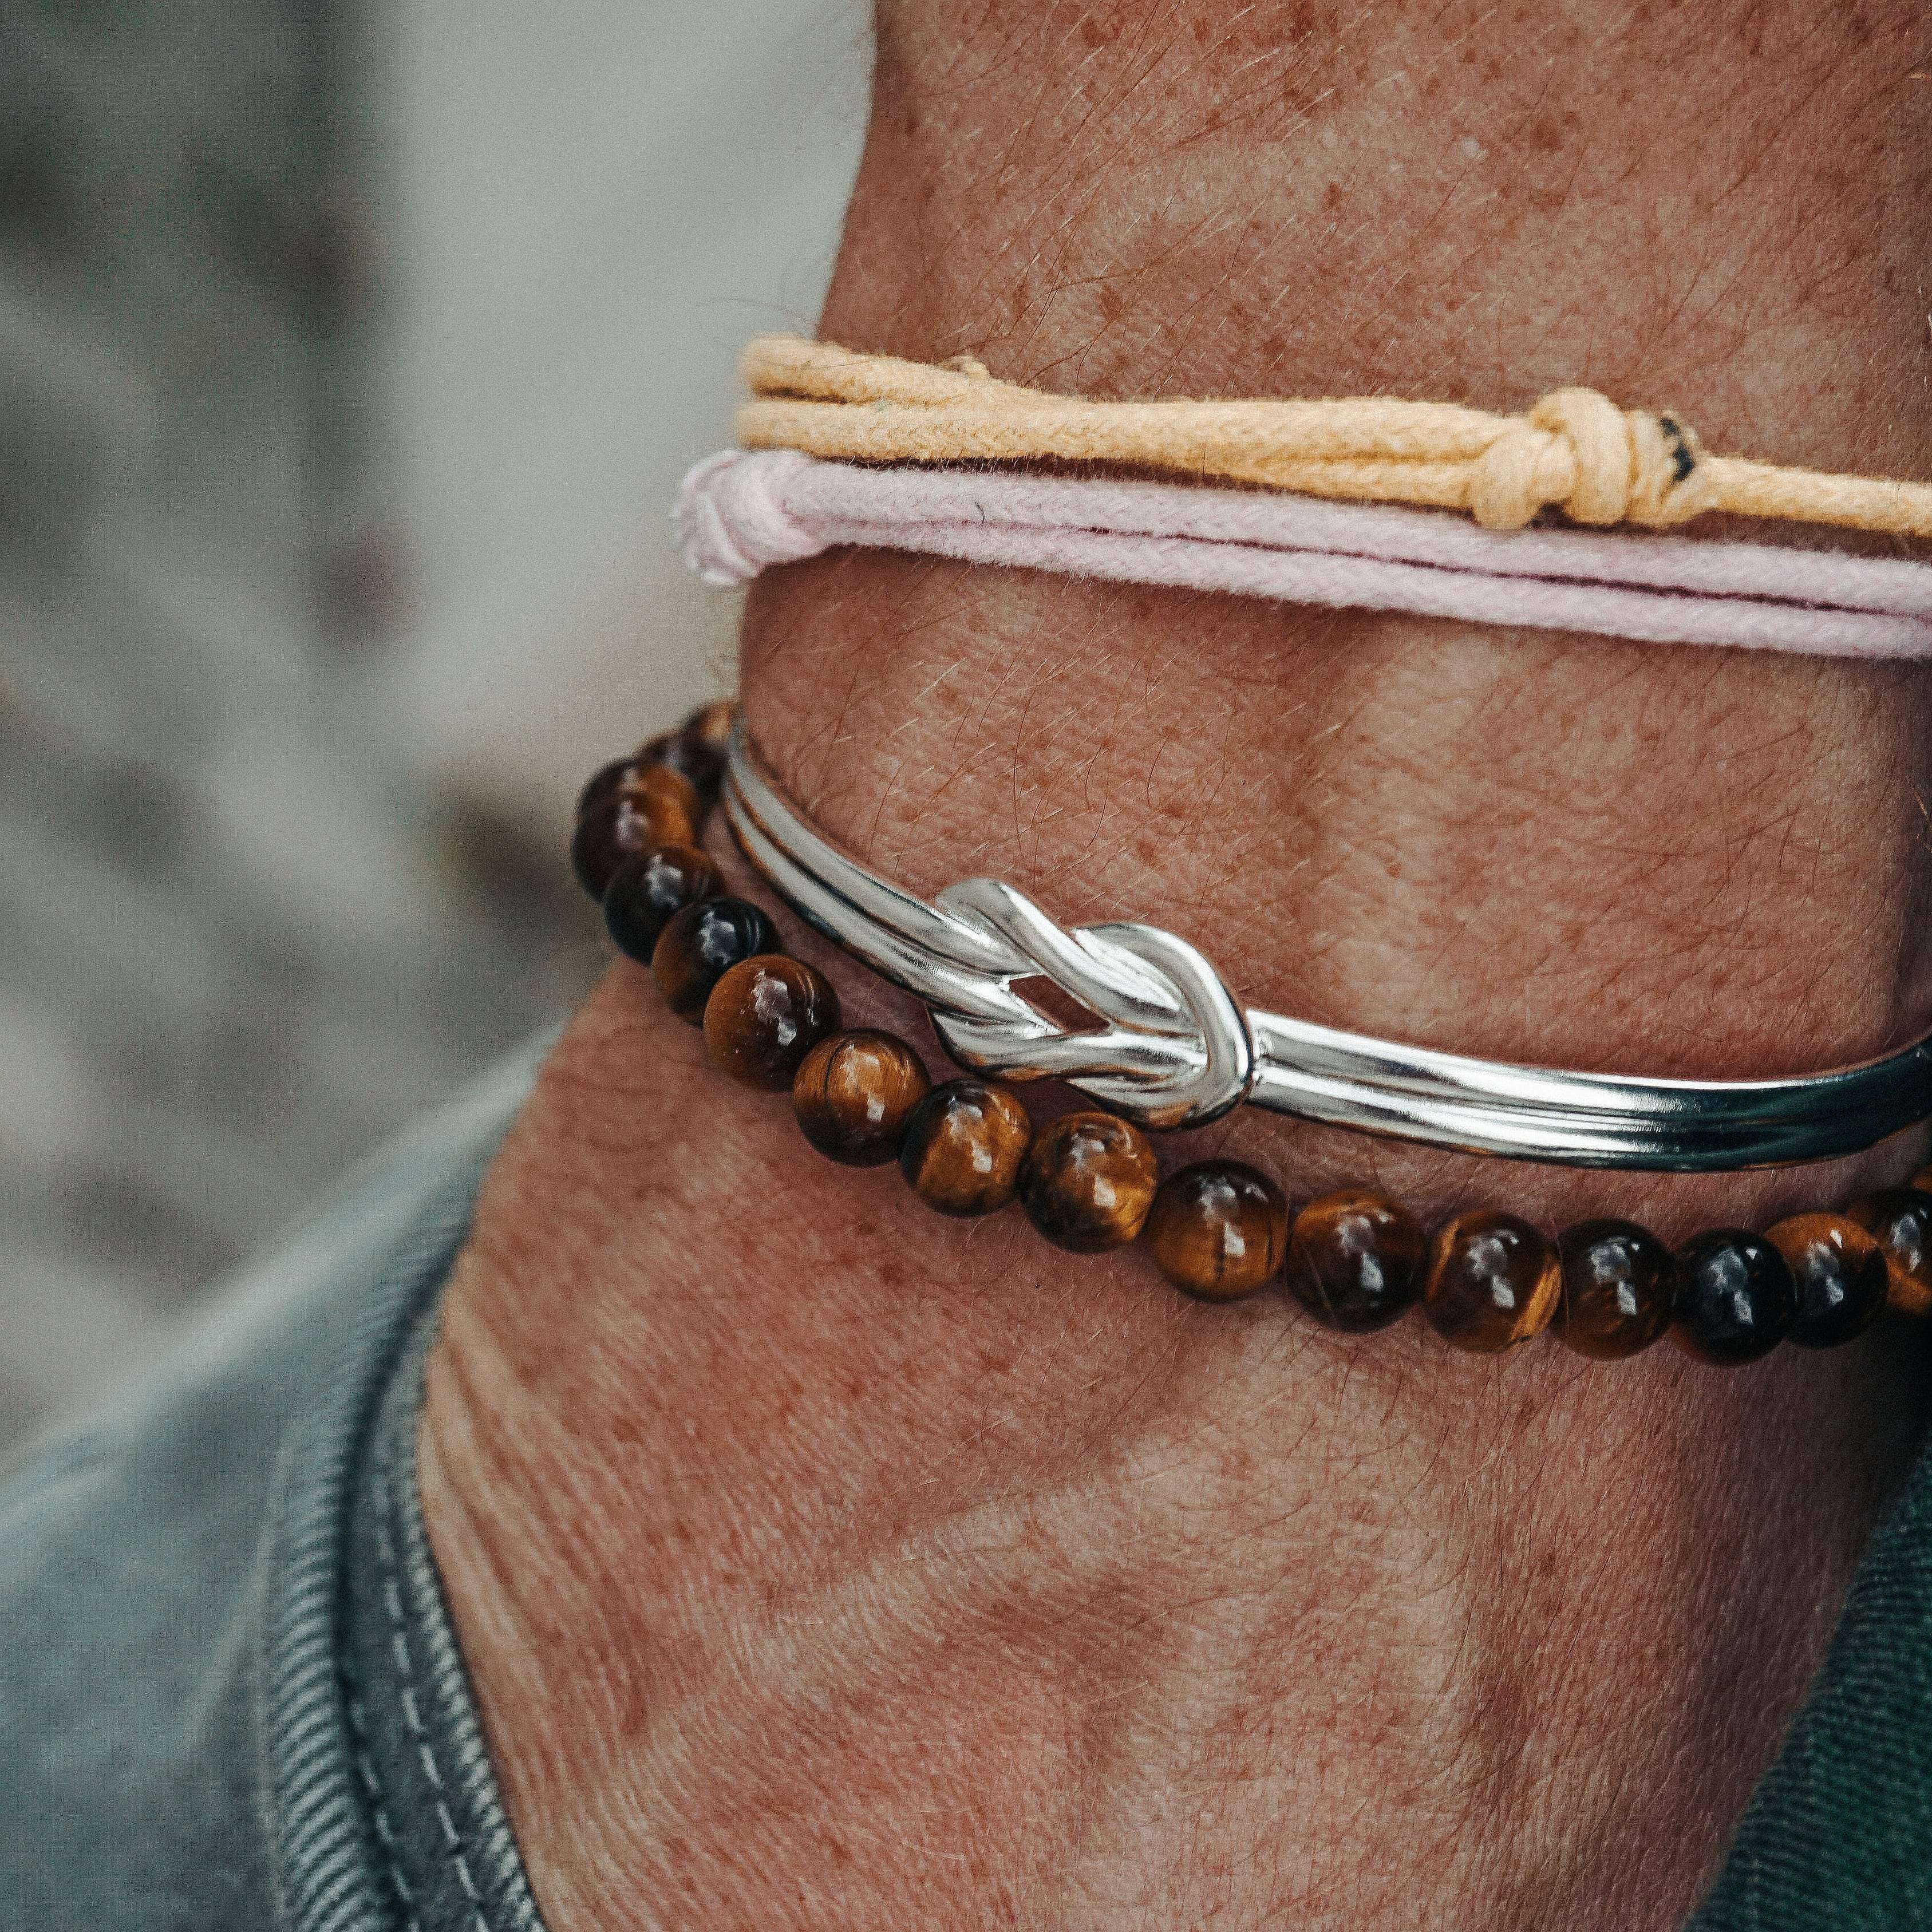 Fashionable bracelet for men made of brown stone beads